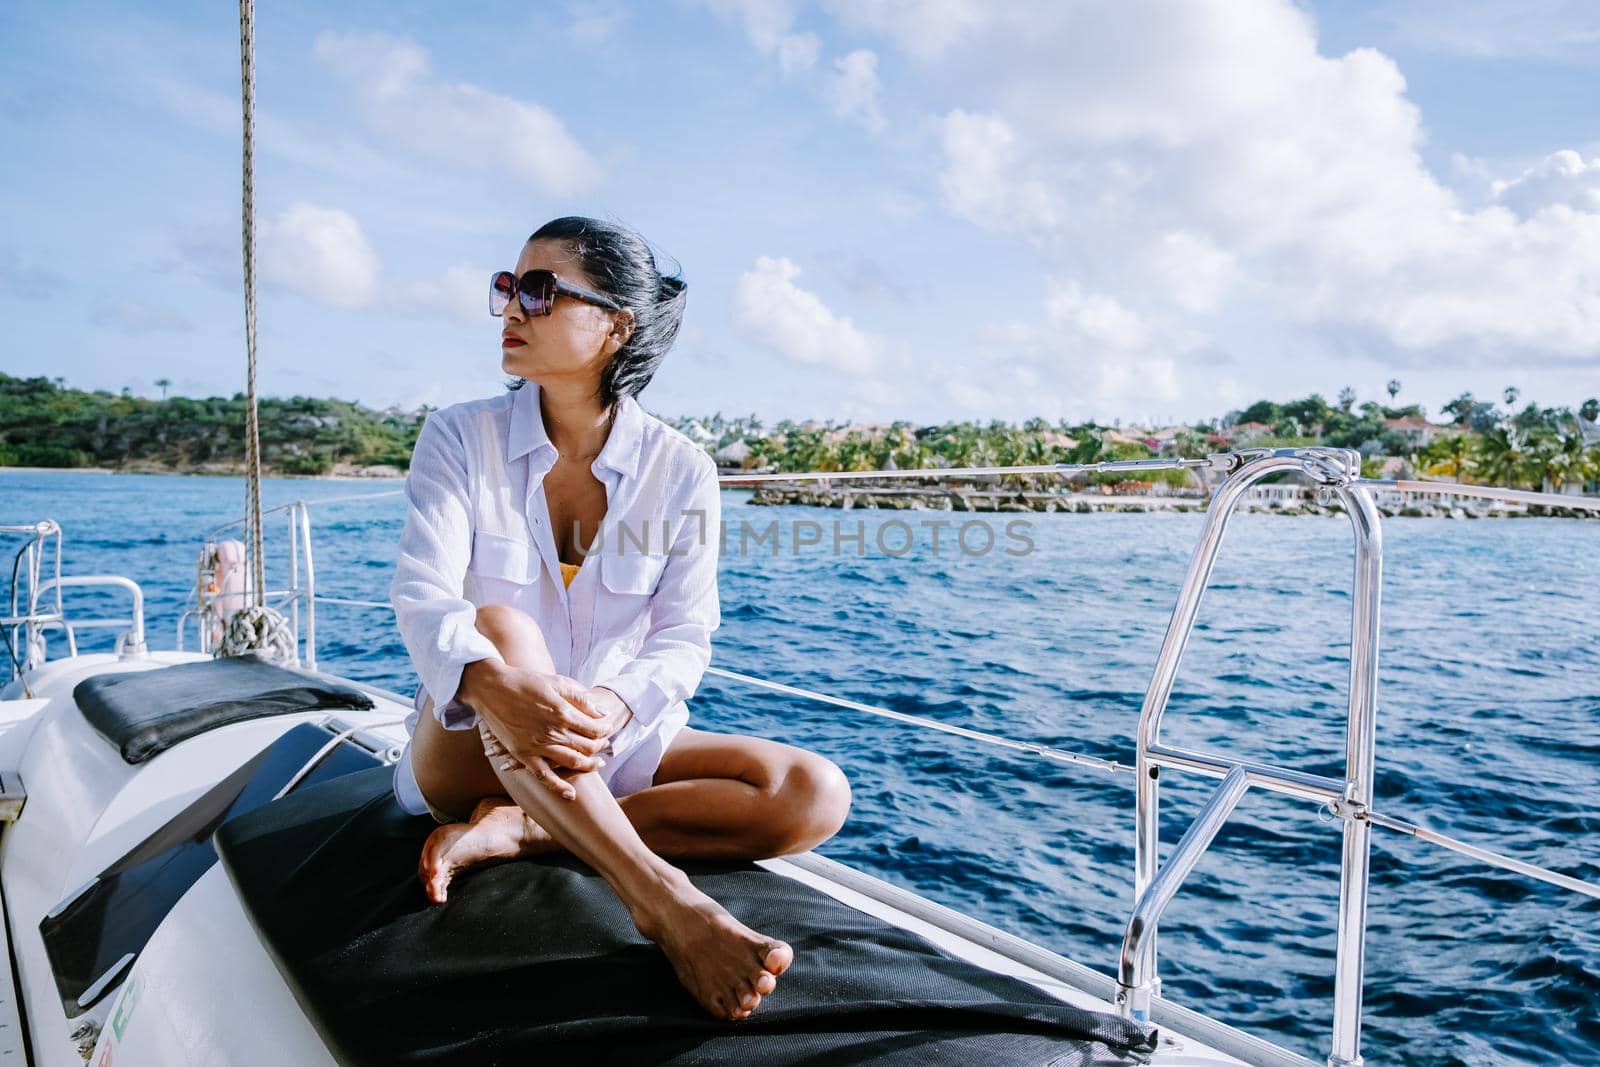 Small Curacao Island famous for day trips and snorkeling tours on white beaches blue clear ocean, Curacao Island in the Caribbean woman on sailing boat during a vacation holiday